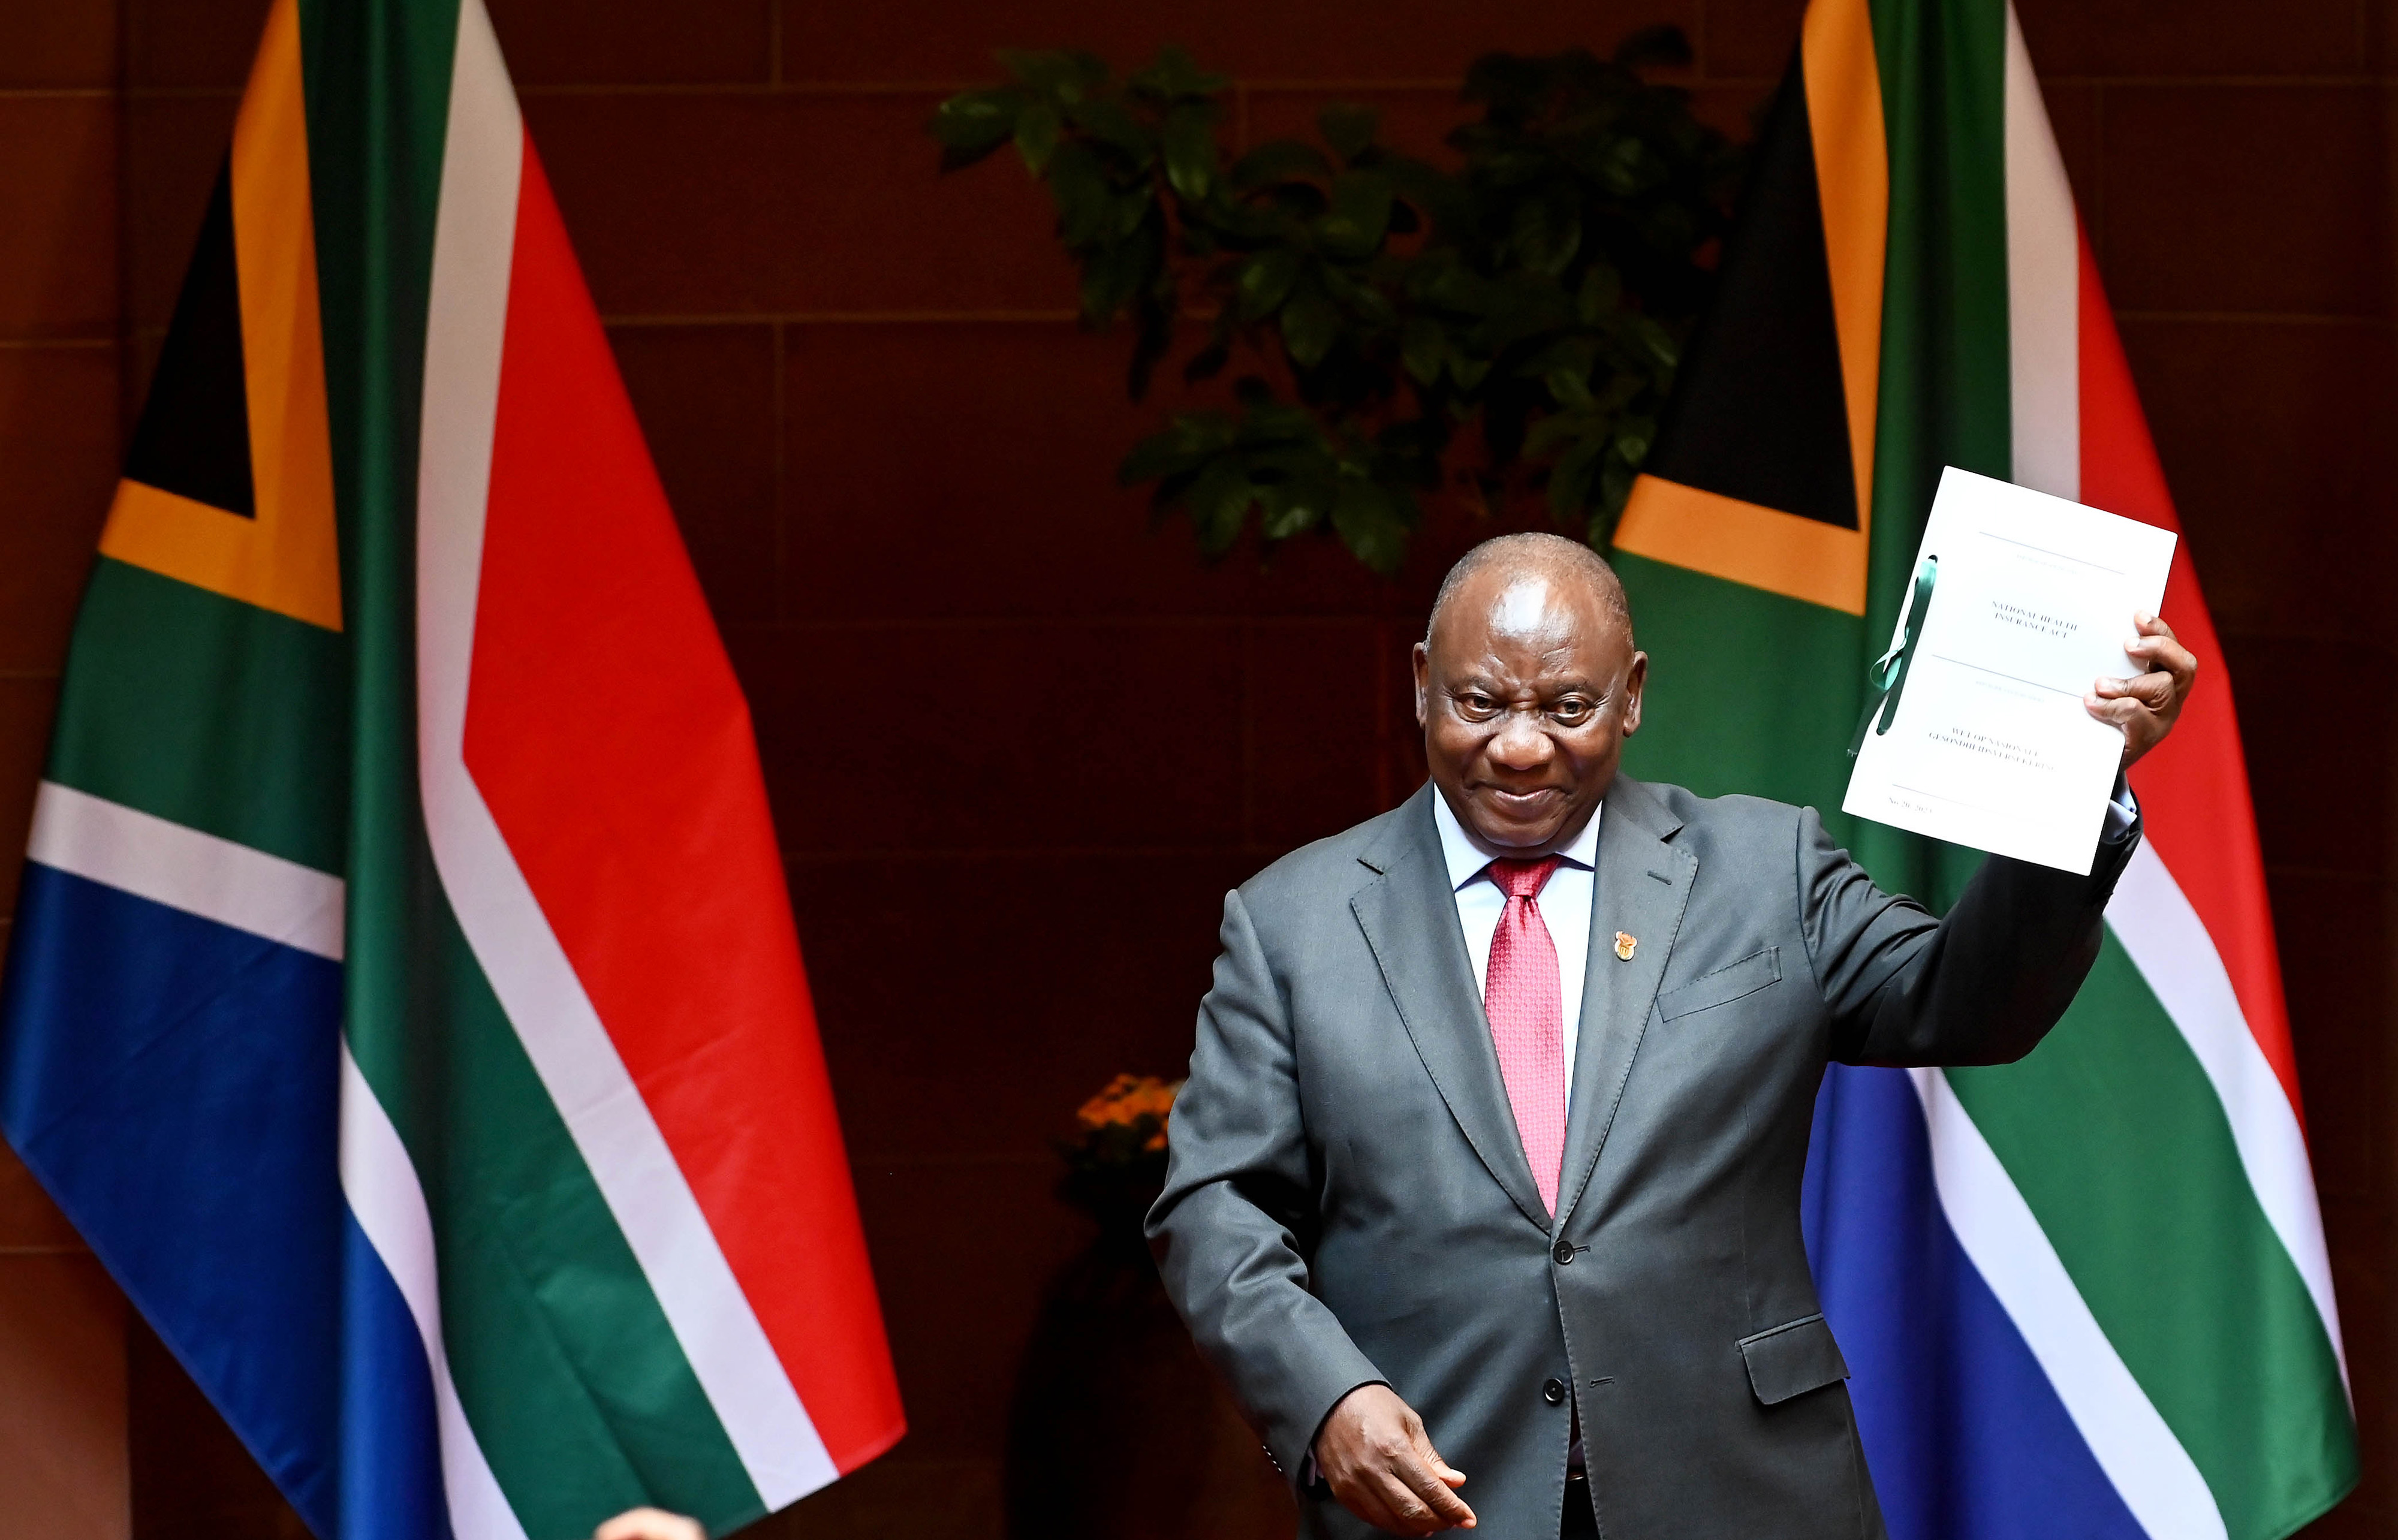 Cyril Ramaphosa shows the signed bill for National Health Insurance signed into law in Pretoria, South Africa on May 15.